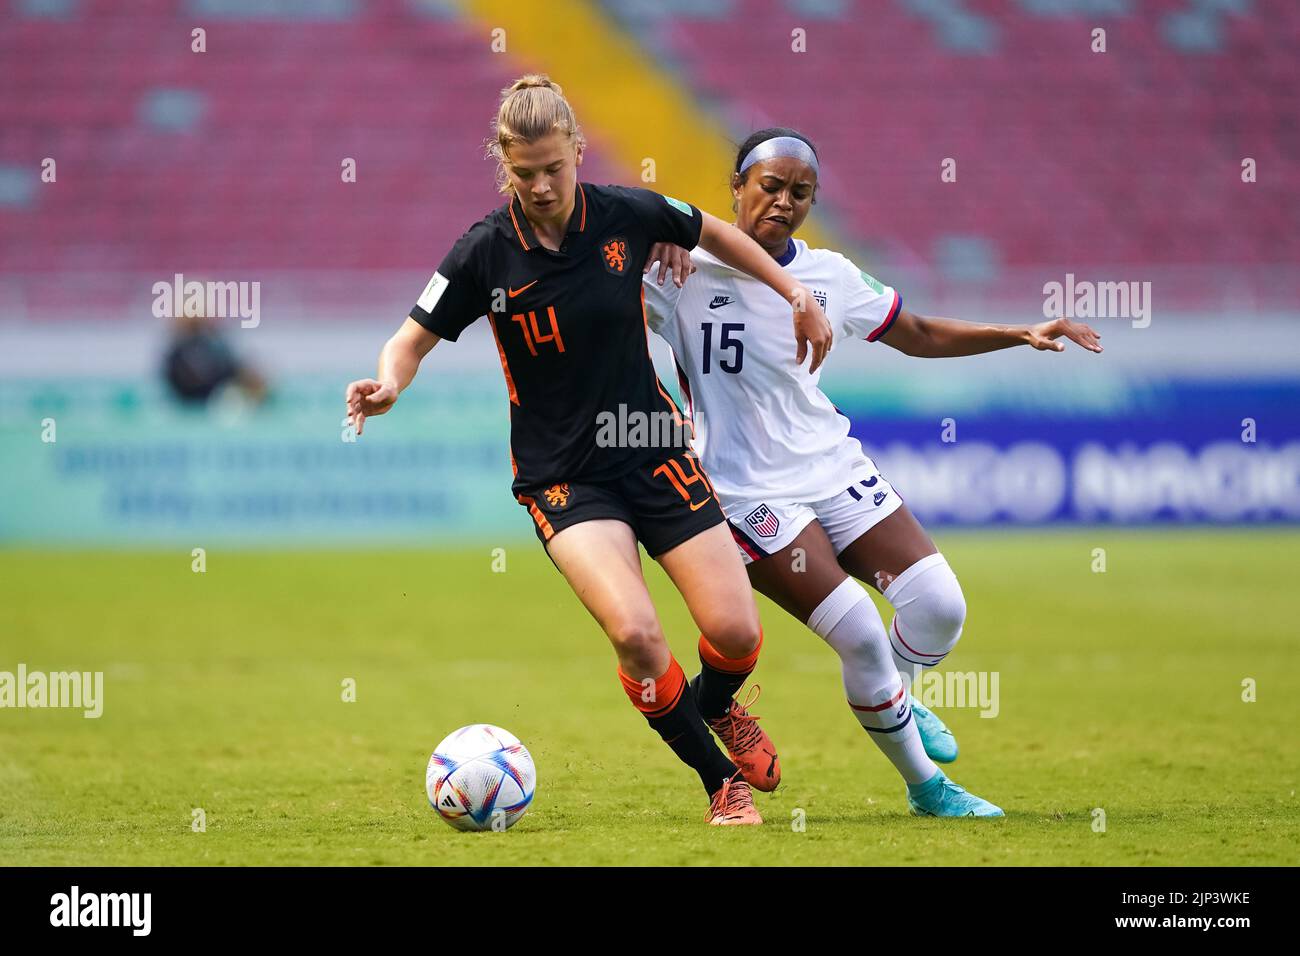 San Jose, Costa Rica. 14th Aug, 2022. San Jose, Costa Rica, August 14th 2022: Senna Koeleman (14 Netherlands) and Trinity Byars (15 USA) battle for the ball (duel) during the FIFA U20 Womens World Cup Costa Rica 2022 football match between USA and Netherlands at Estadio Nacional in San Jose, Costa Rica. (Daniela Porcelli/SPP) Credit: SPP Sport Press Photo. /Alamy Live News Stock Photo